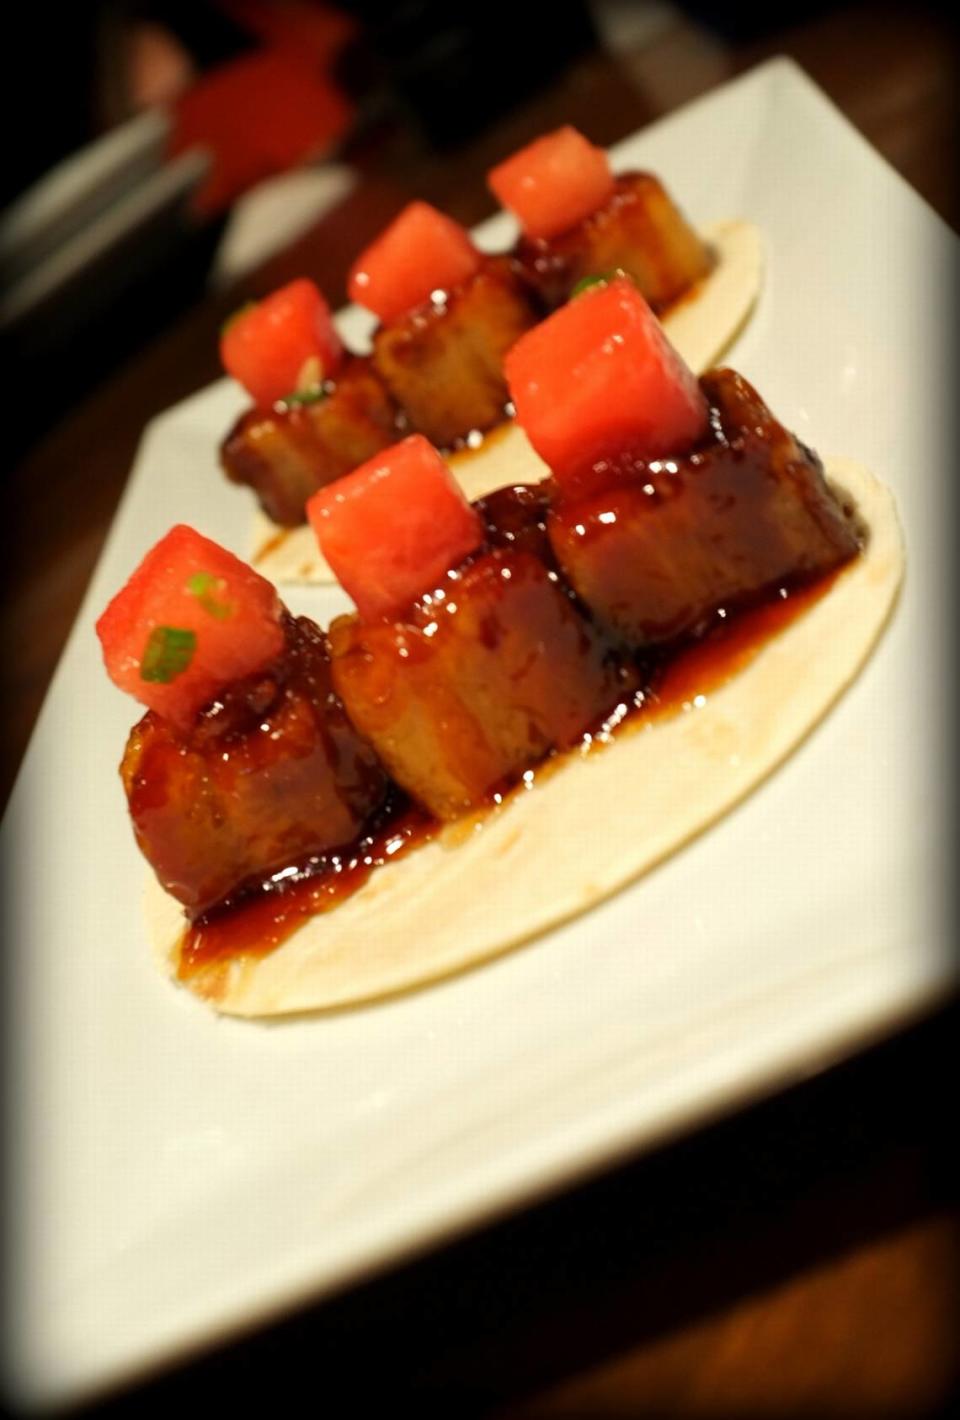 Soul Gastrolounge is known for its pork-belly tacos.